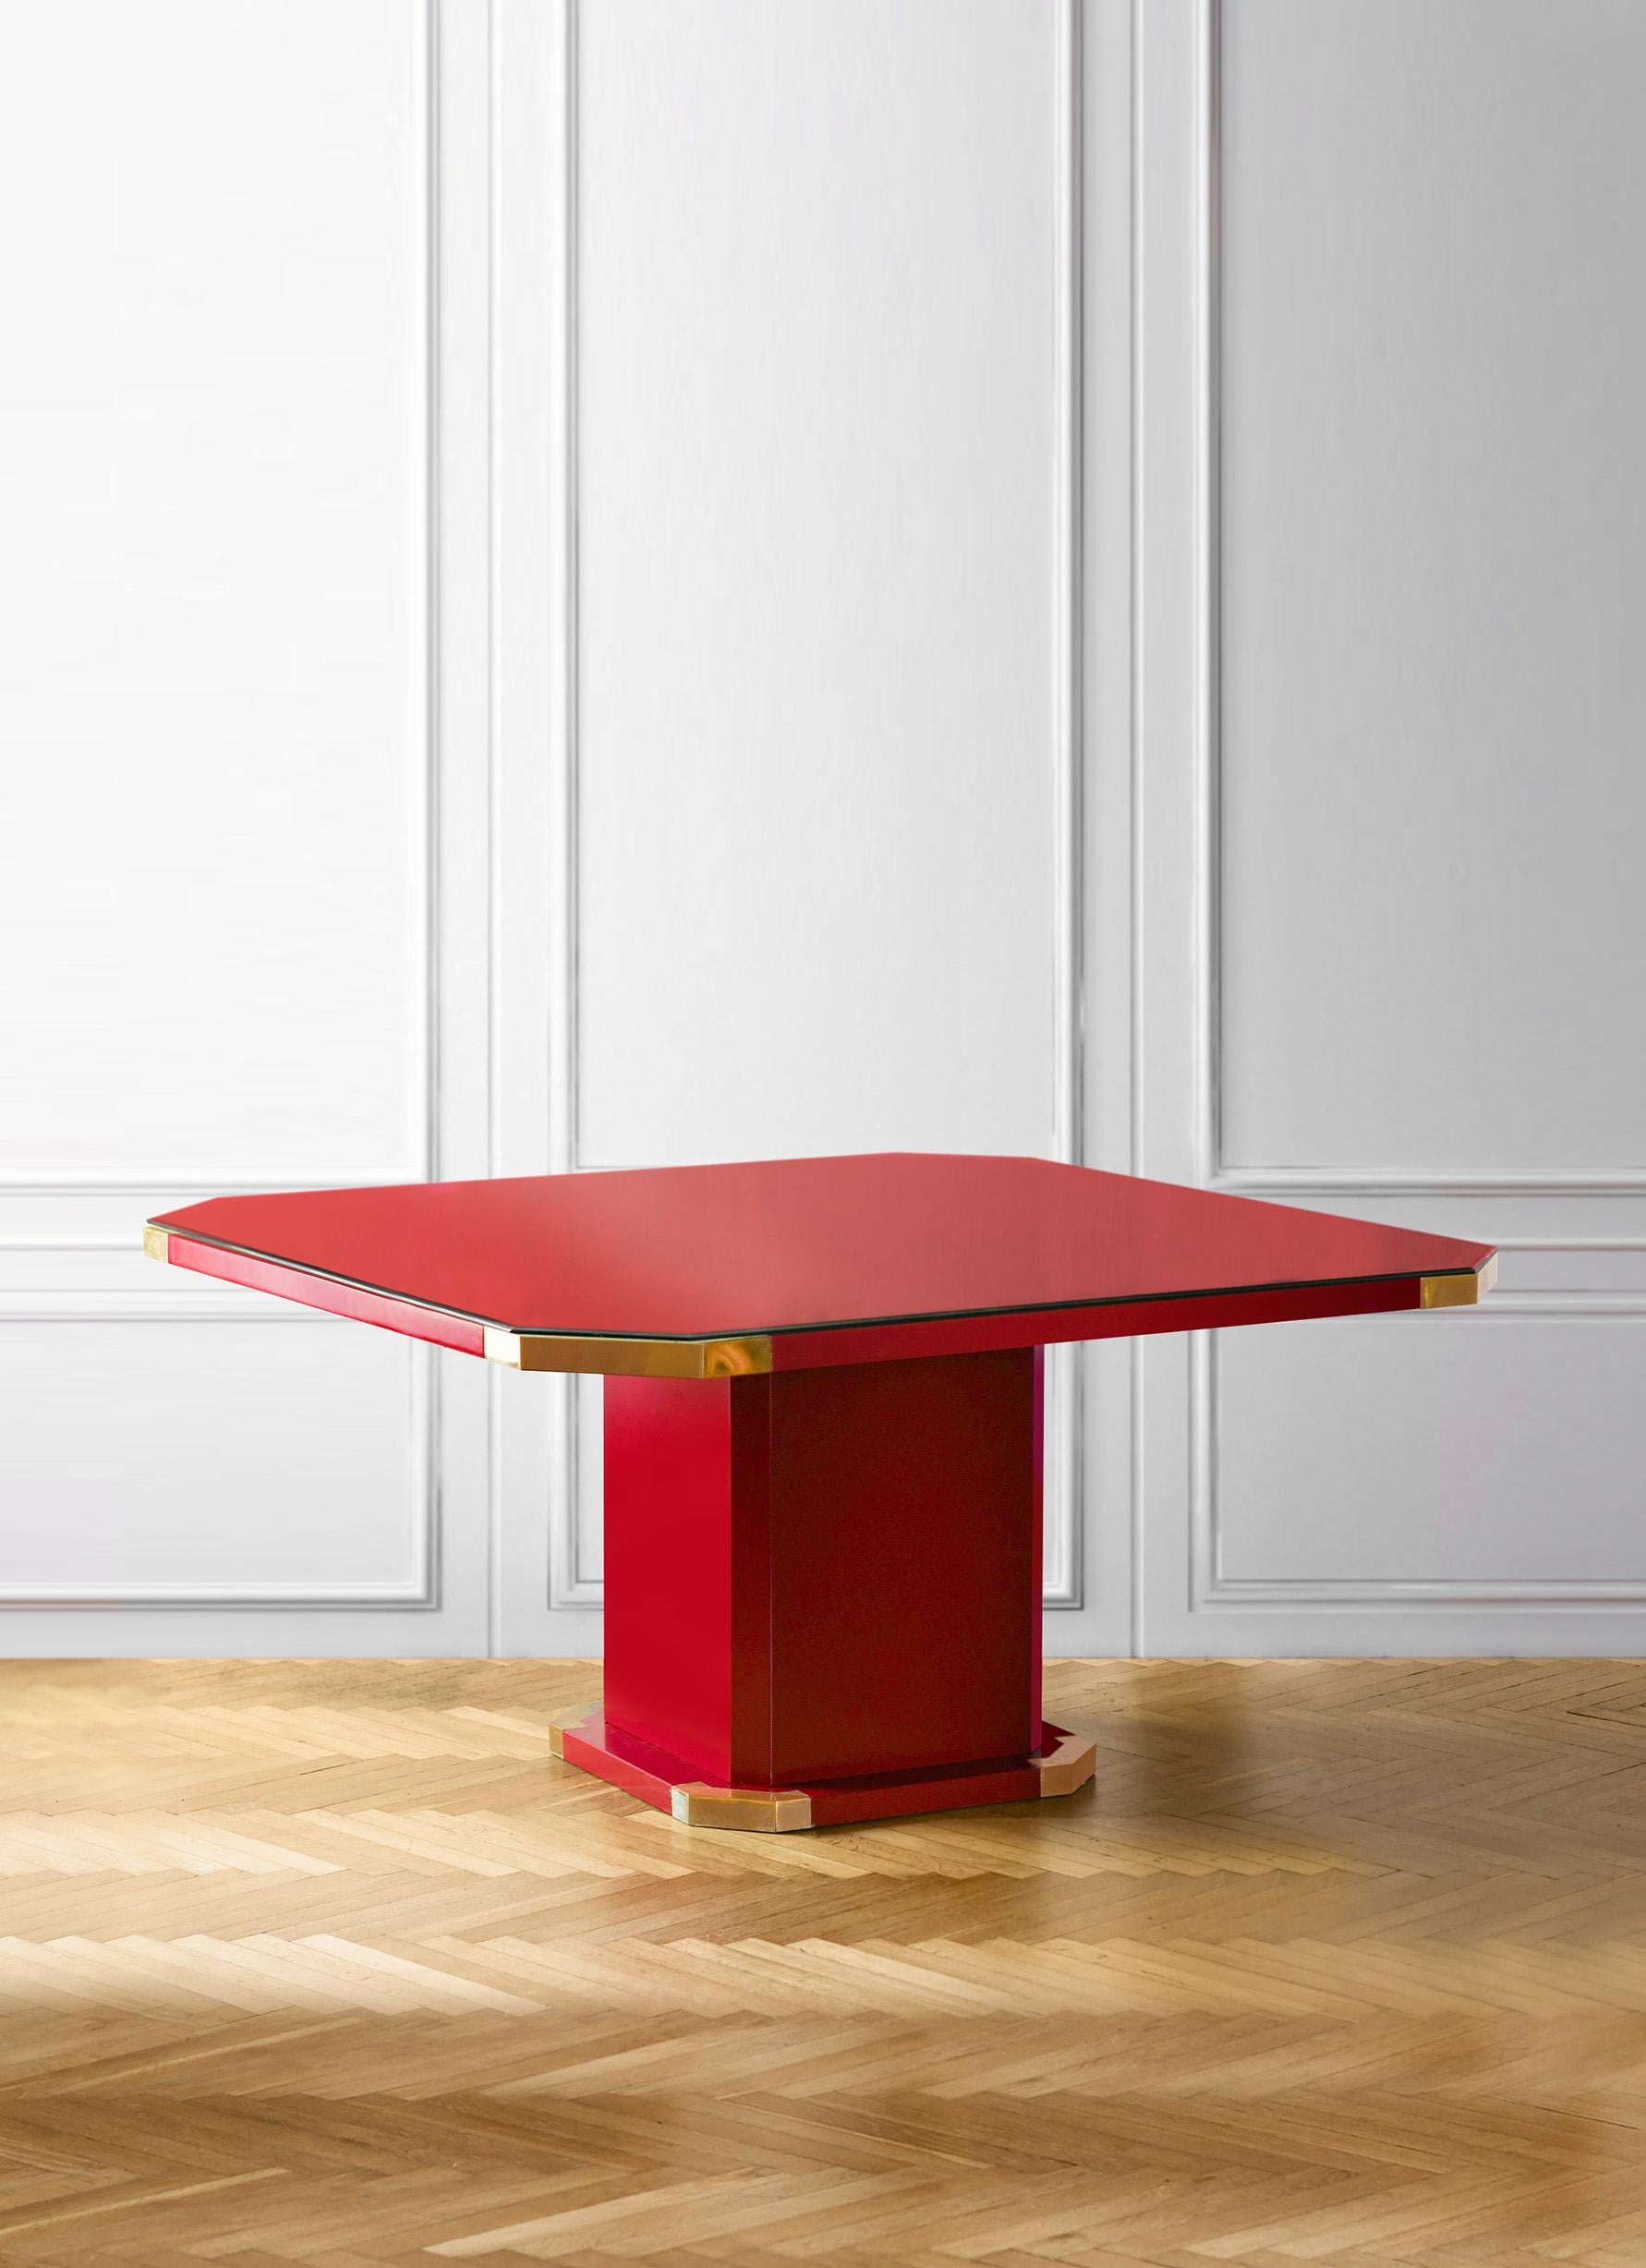 China red lacquered hexagonal table with brass details and cut crystal shelf,
Italy 1980.
Dimensions: 140 l x 71 h x 140 d cm
Materials: wood, brass, cut crystal
Production: Italian production 1980